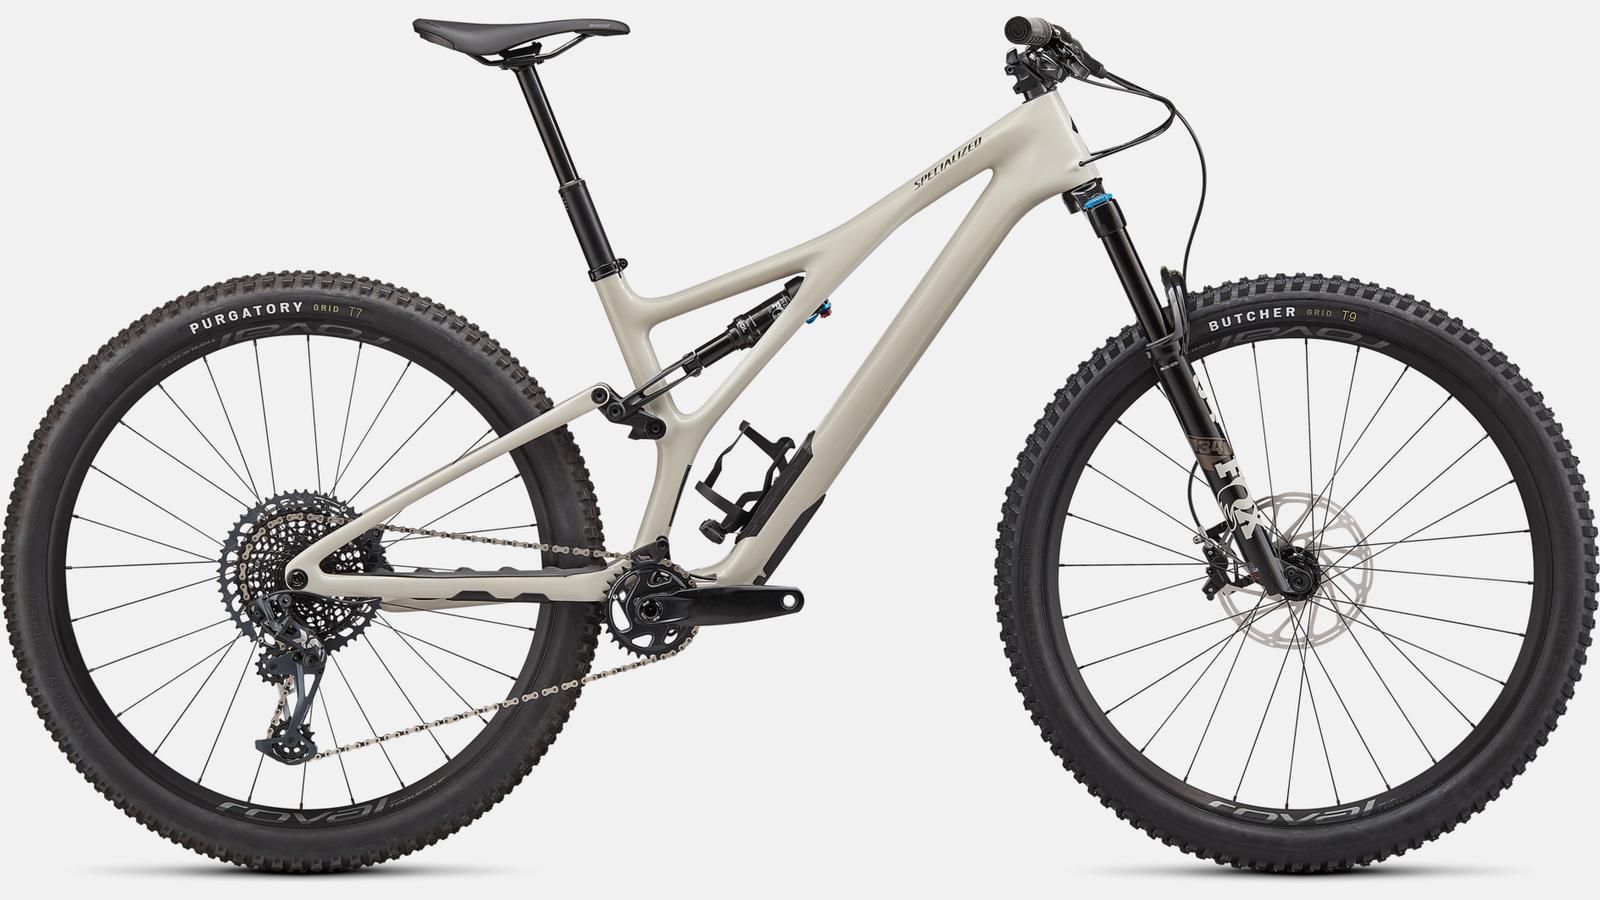 Paint for 2022 Specialized Stumpjumper Expert - Gloss White Mountains